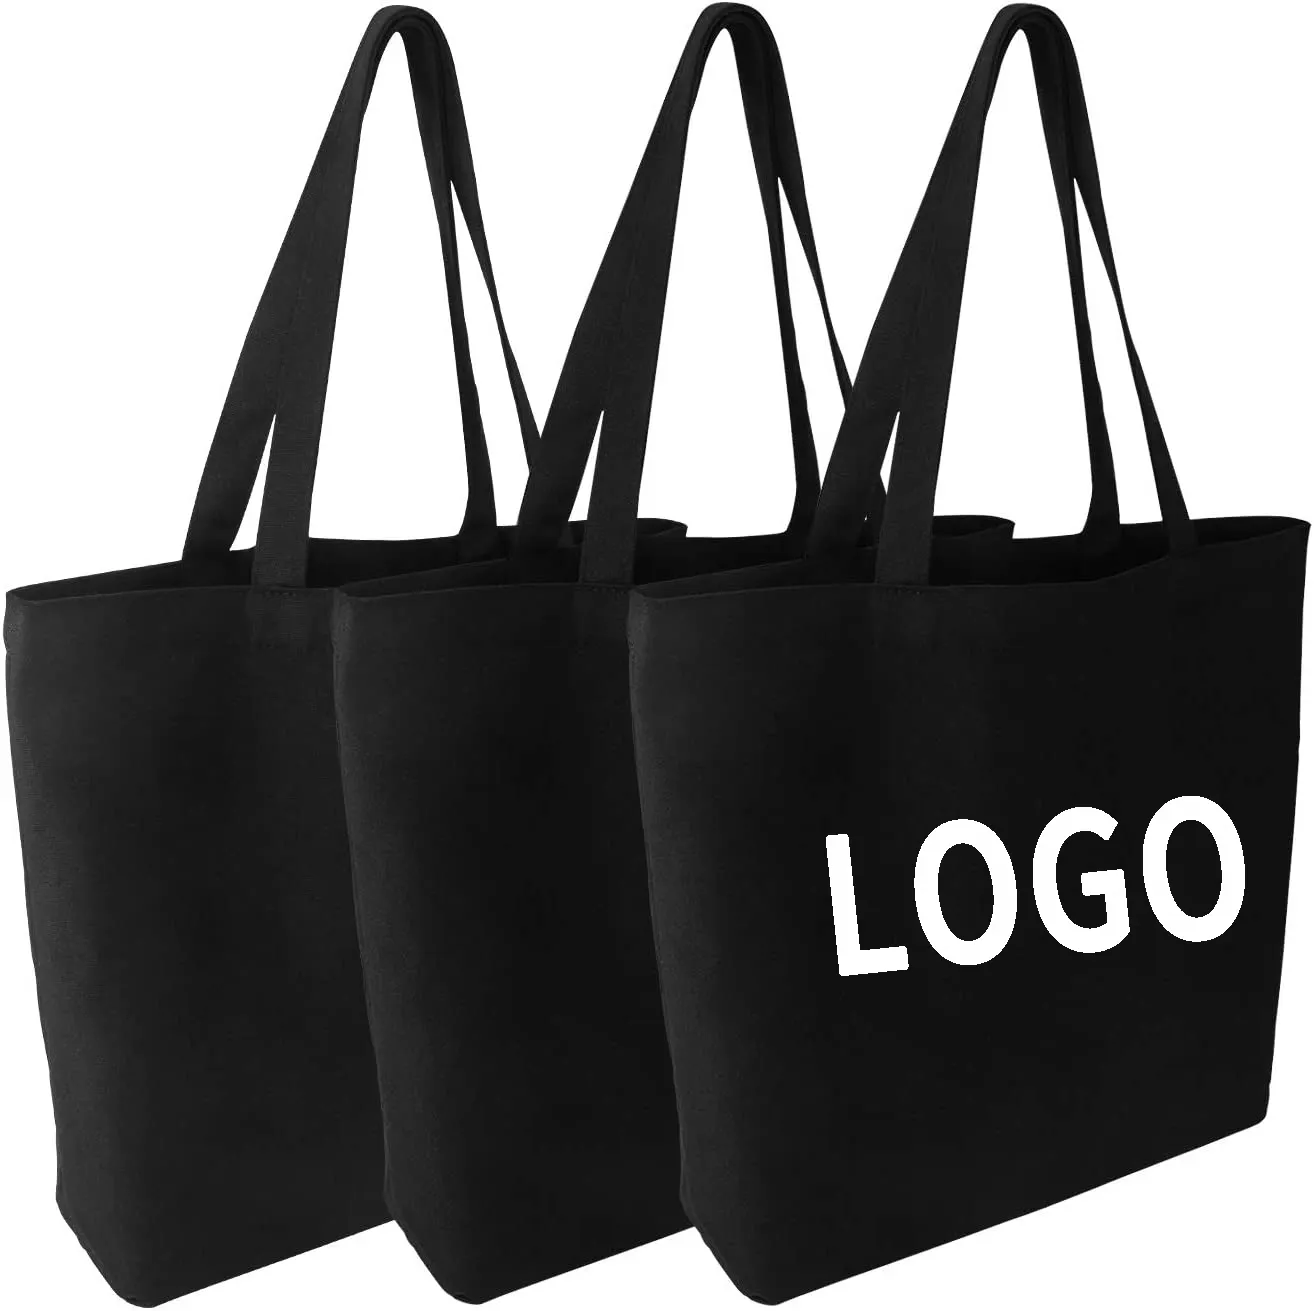 Eco Friendly Shopping Grocery Tote Bag Reusable 12oz Cotton Canvas Tote Bag Recycled Cotton Bag With Logo